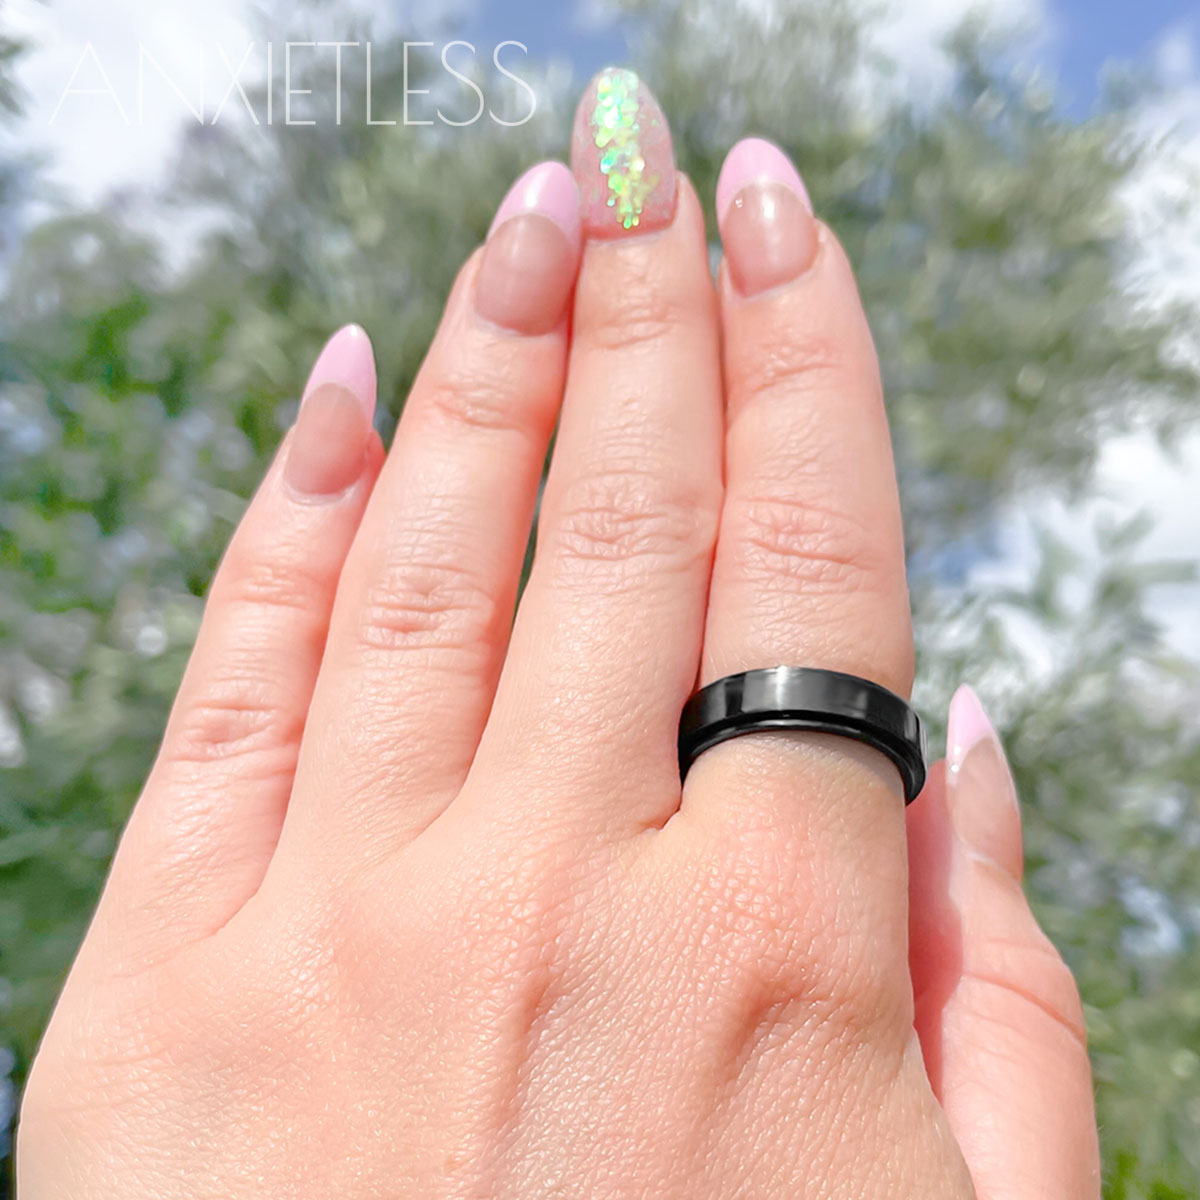 Woman with pink nails wearing a black fidget ring, featuring a smooth polished design, with blurry trees and sky in the background